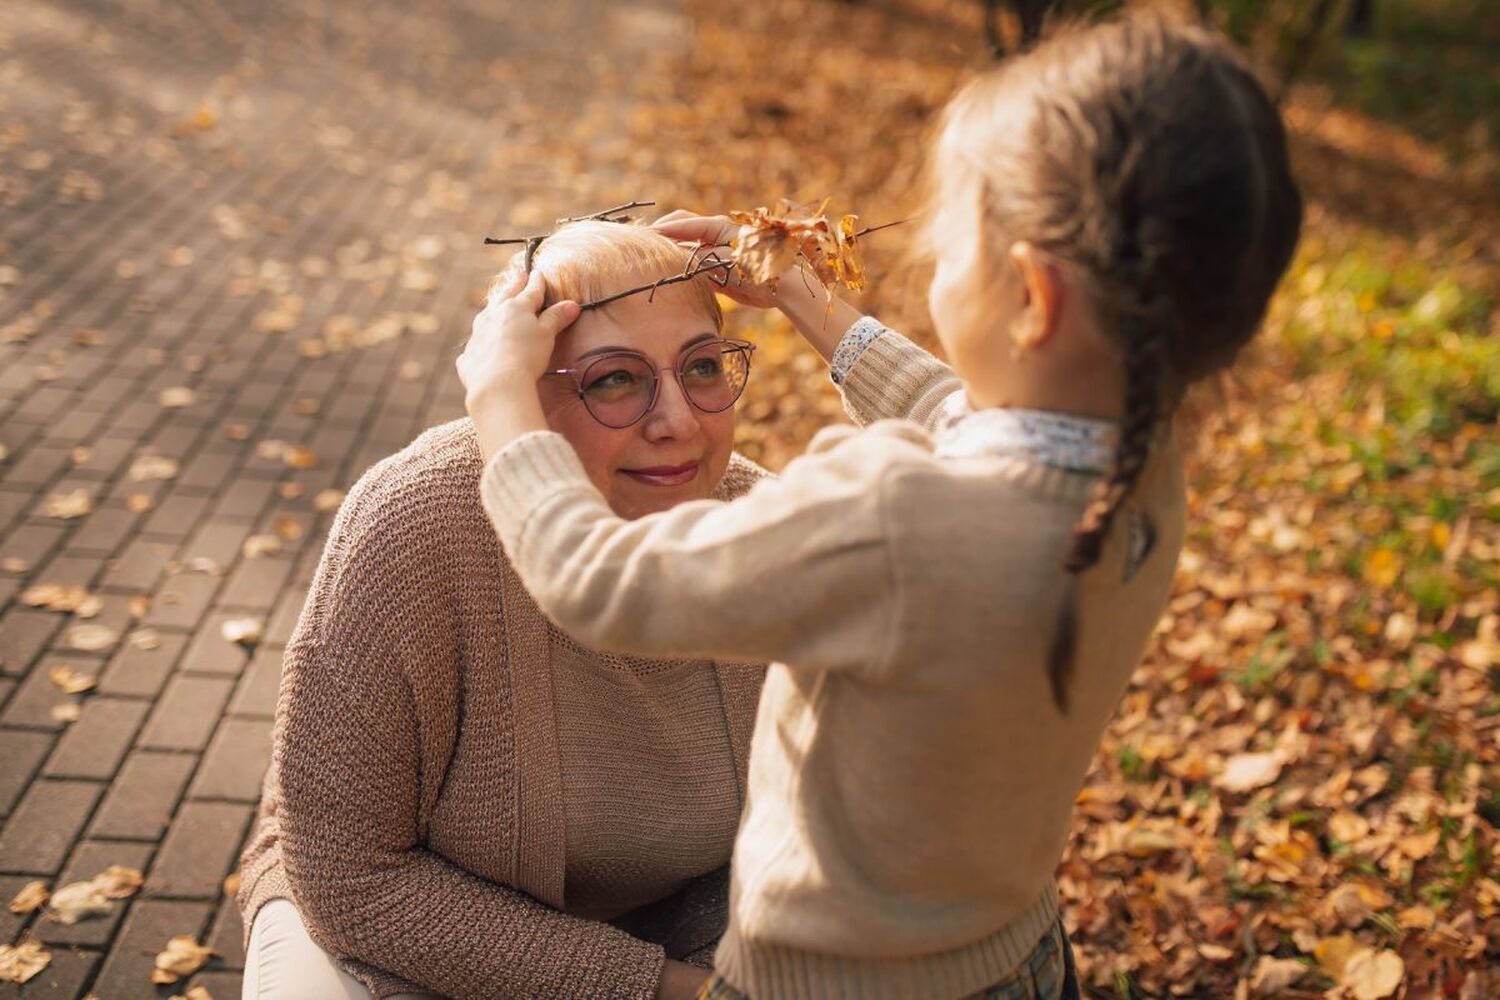 Woman kneeling in front of young girl in autumnal park